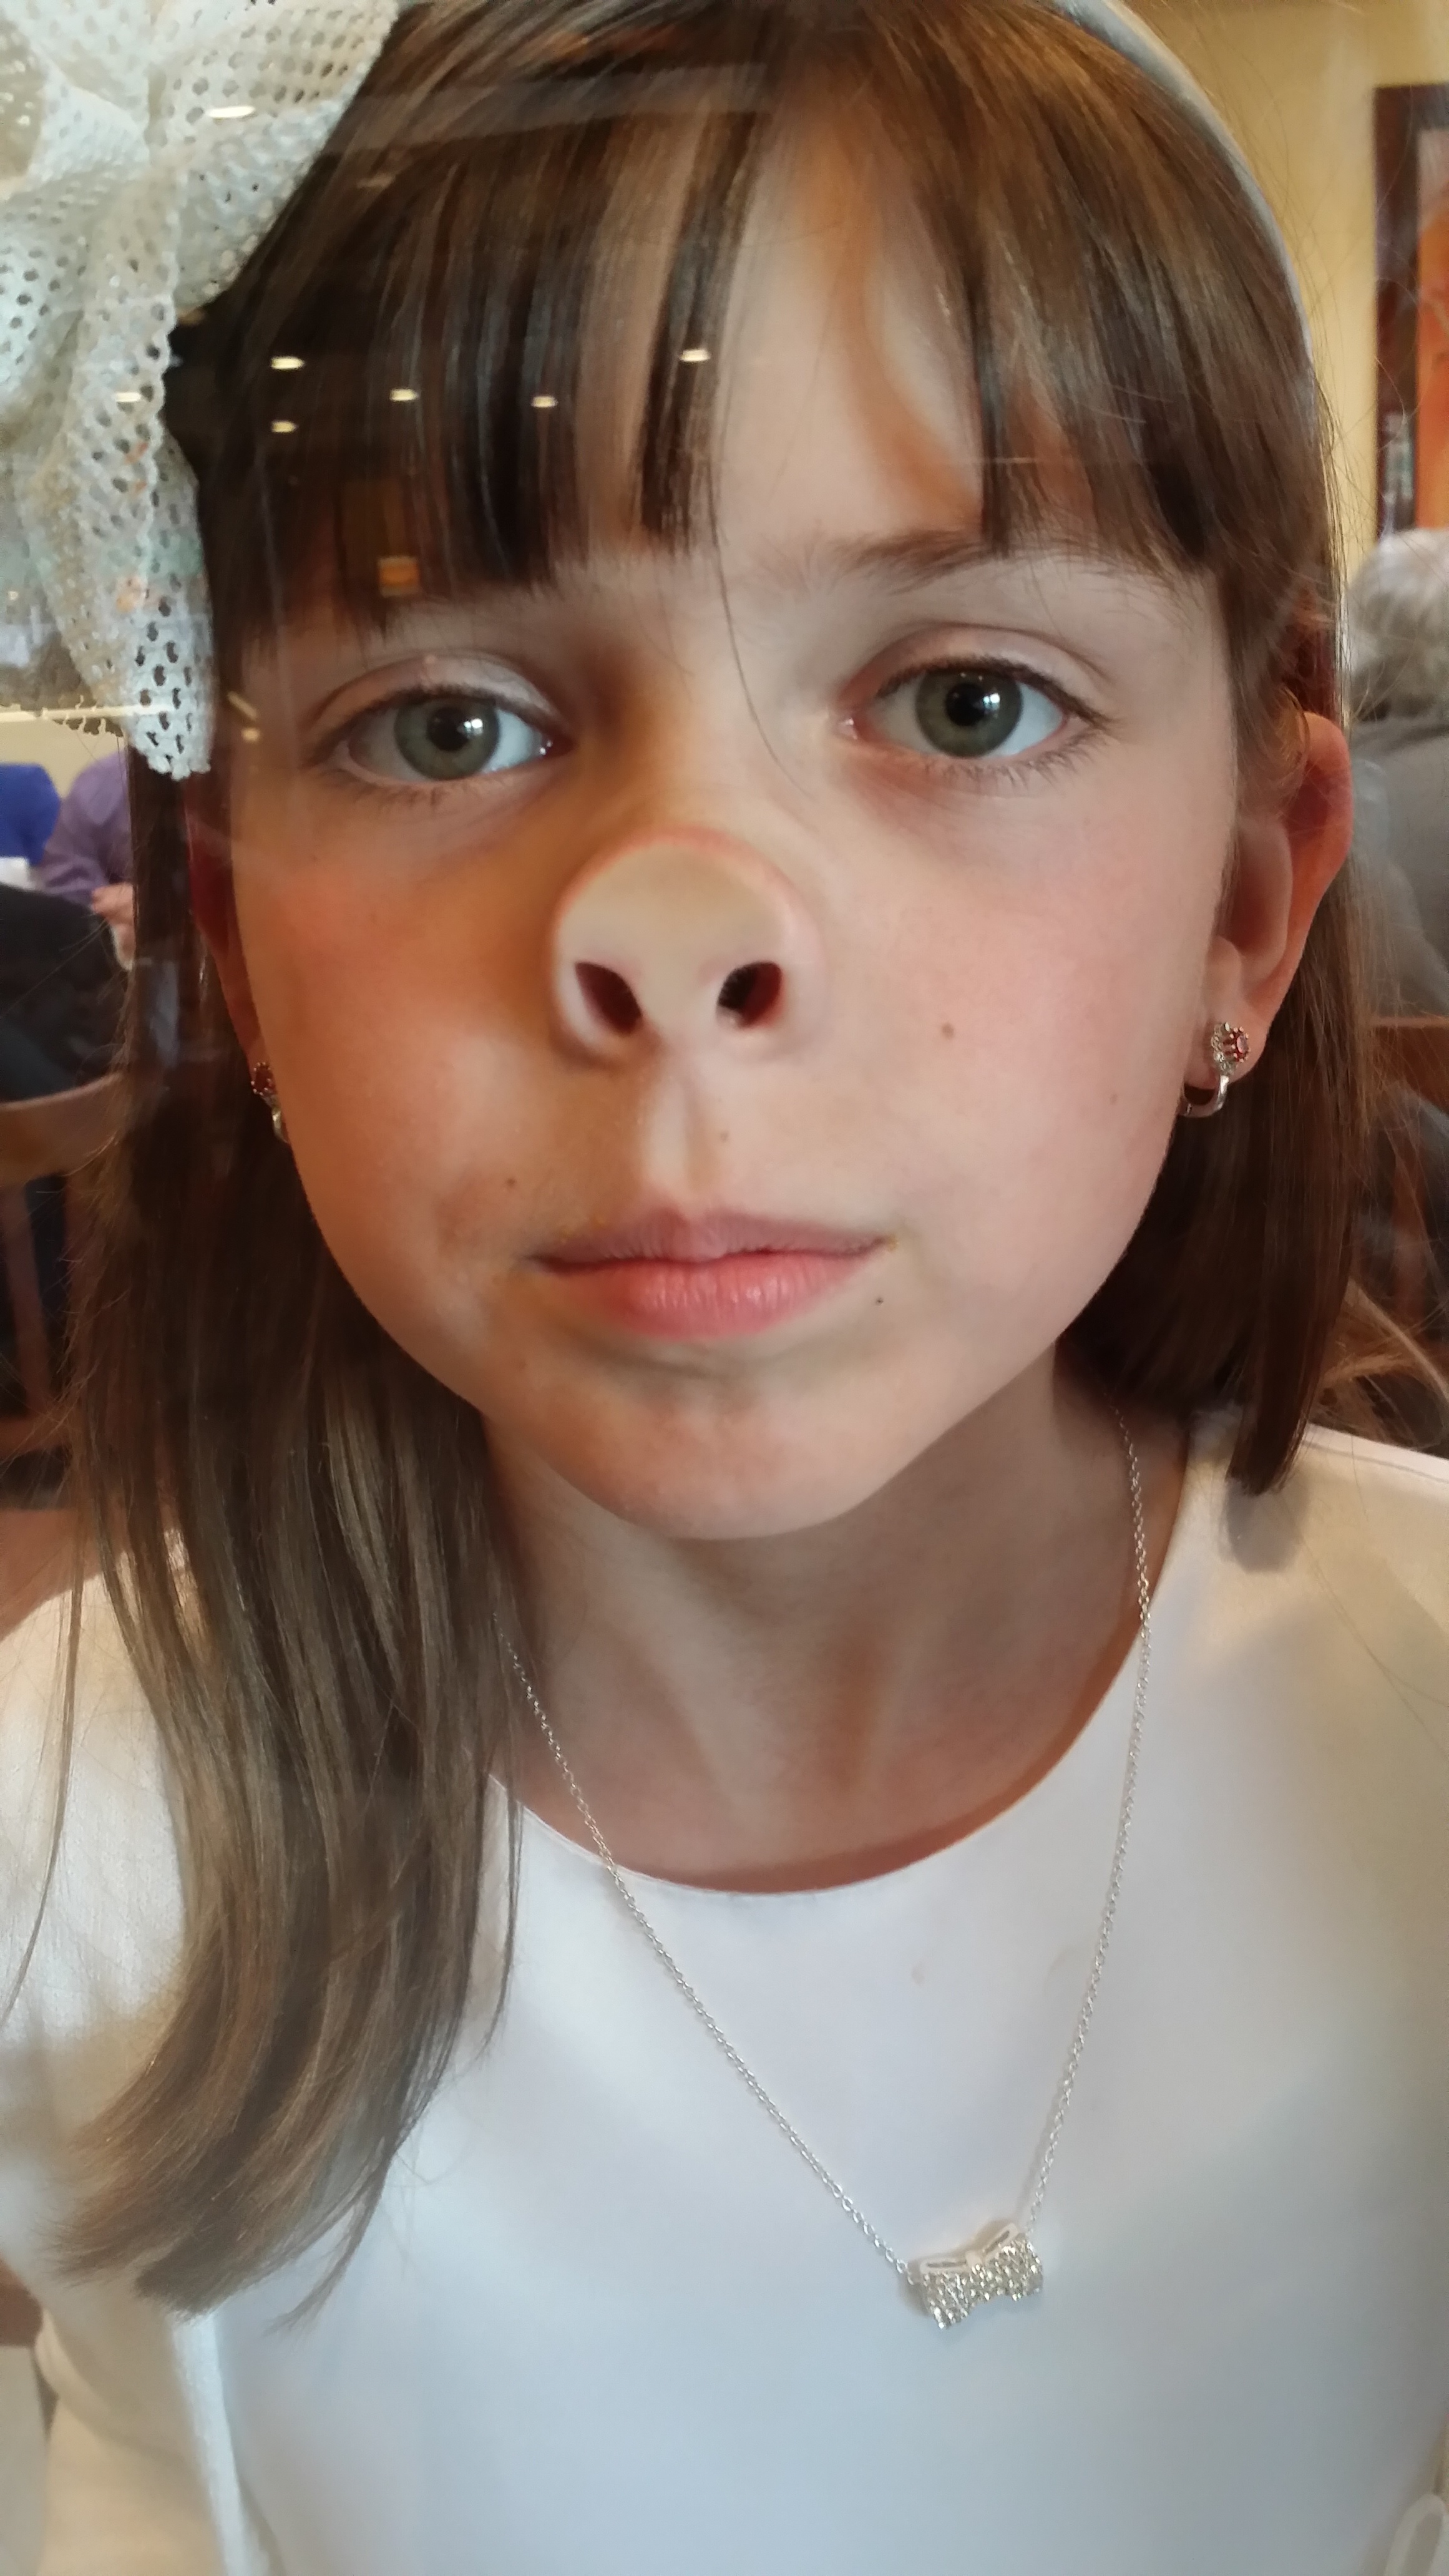 My Step daughter, of one year, BACON BABY. She use to be a vegetarian, I switched her diet to something more substantial, a pork diet, with Great Results~!